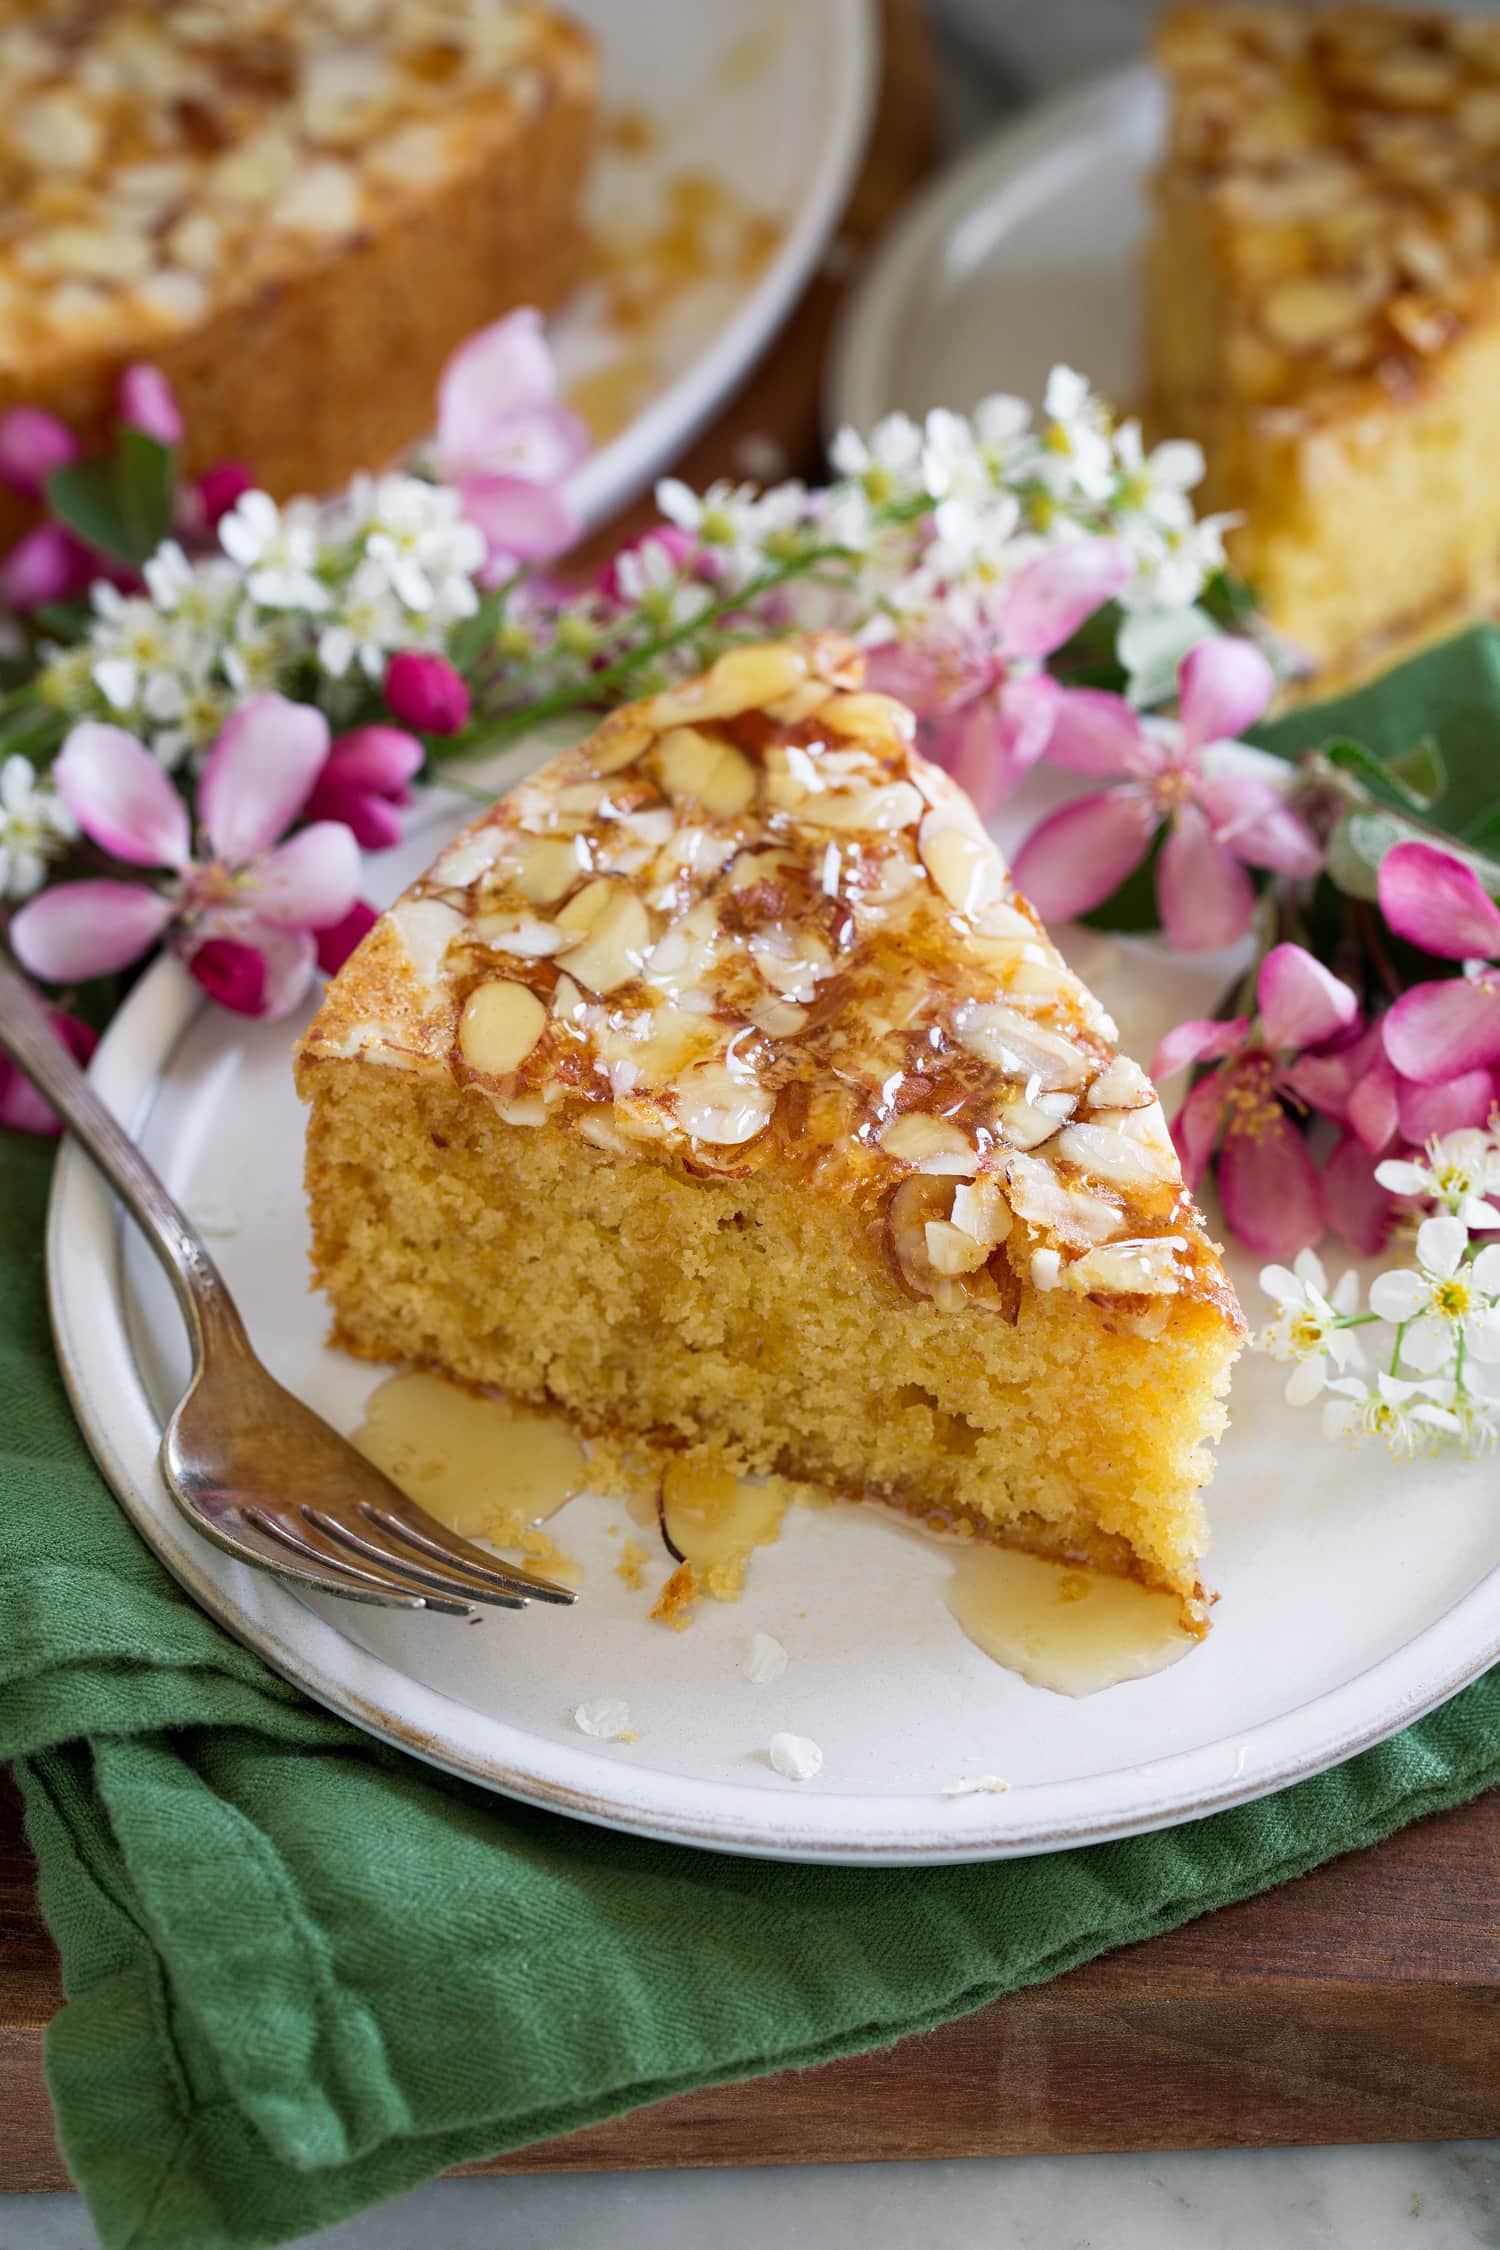 Honey cake with sliced almonds and honey drizzle finish.